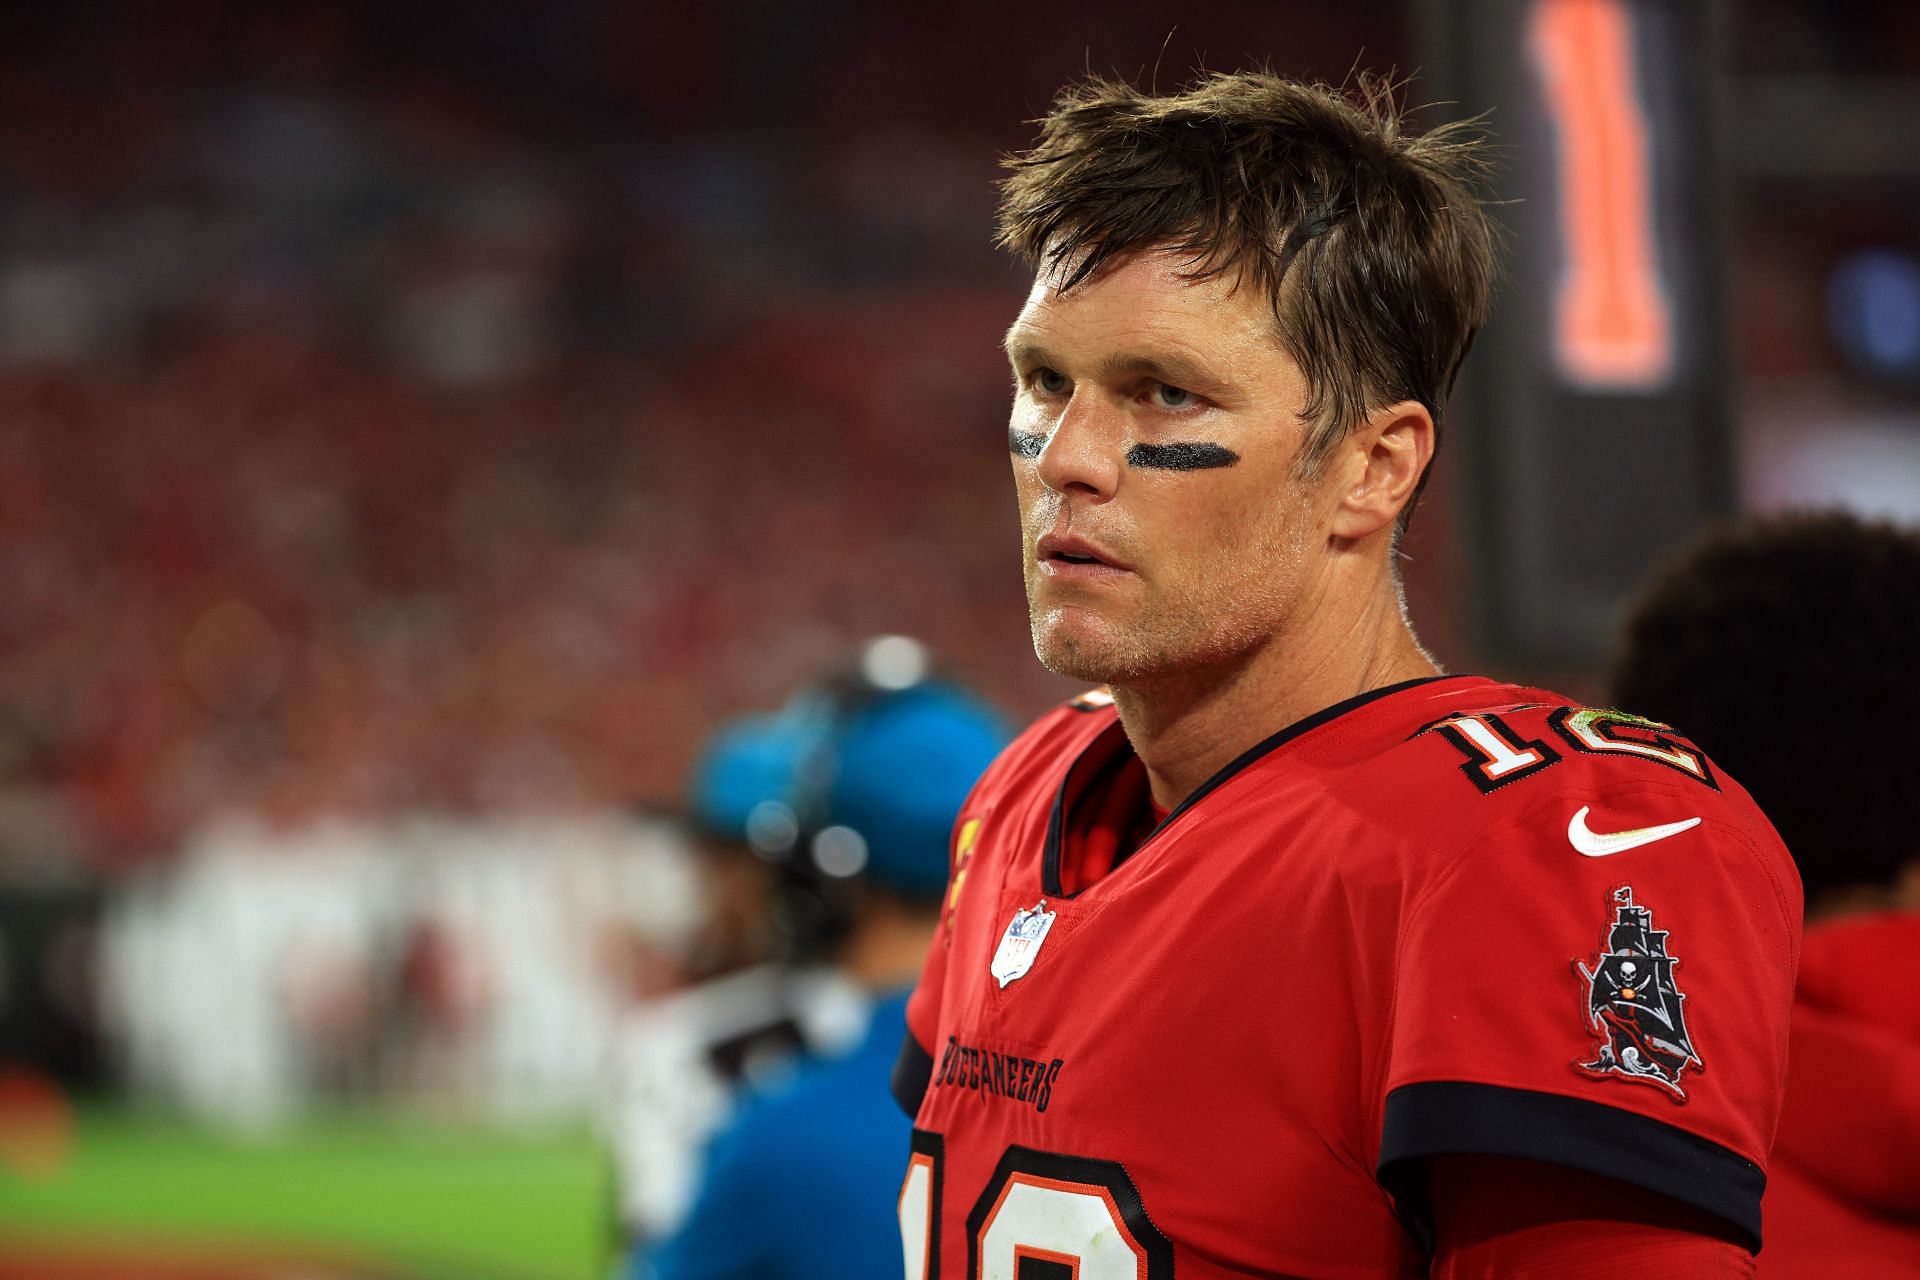 With Tom Brady retired, what are the Buccaneers' QB options